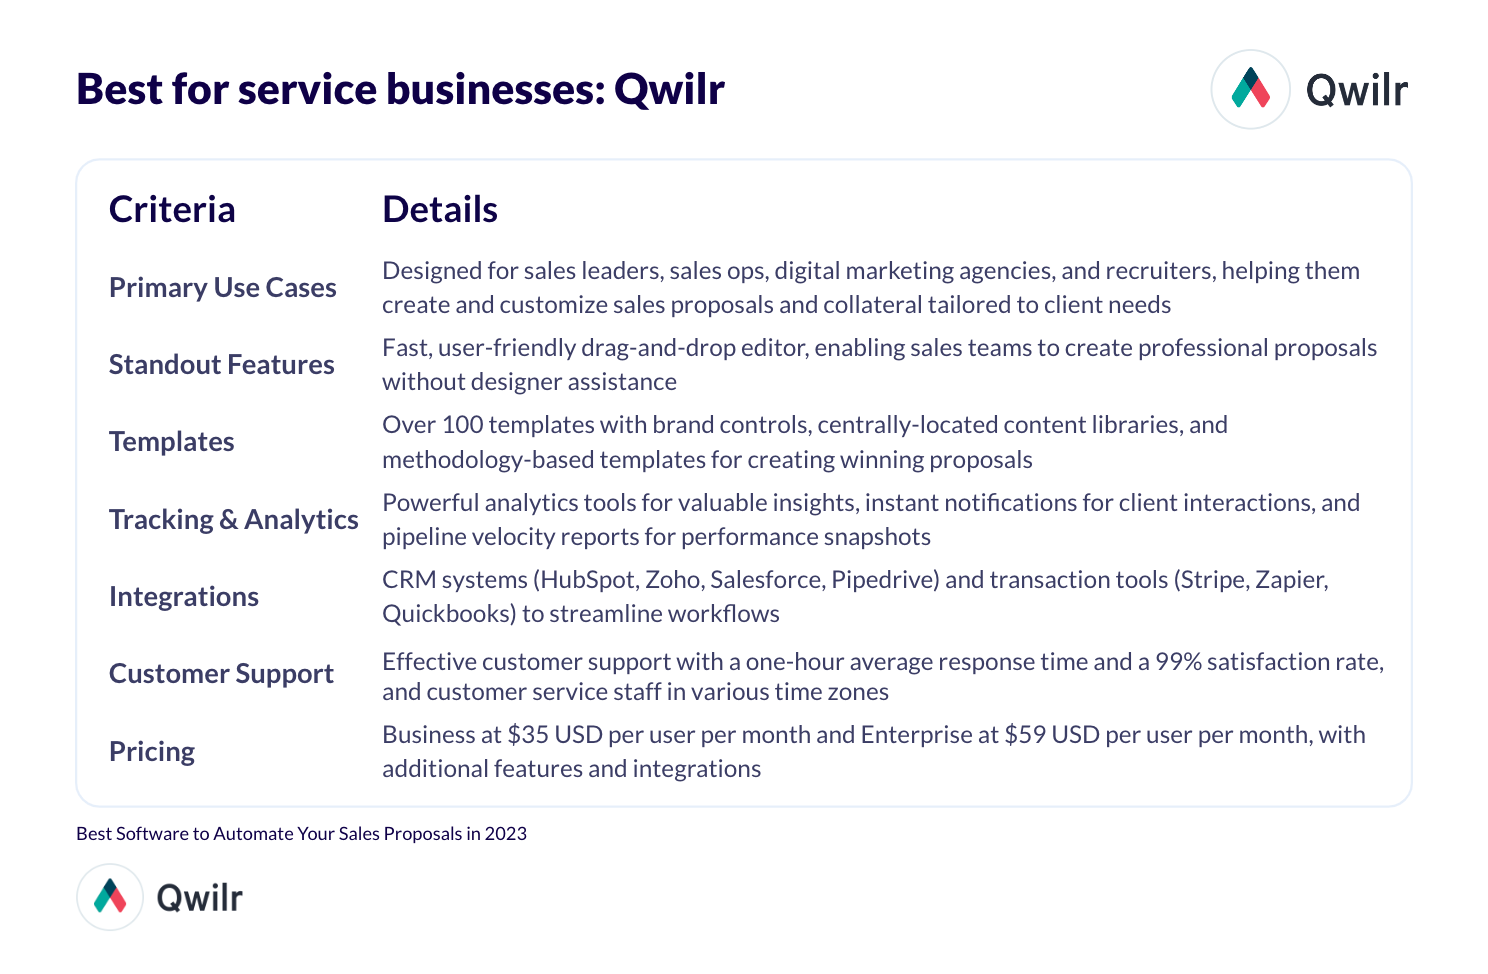 Table summary of Best service businesses: Qwilr